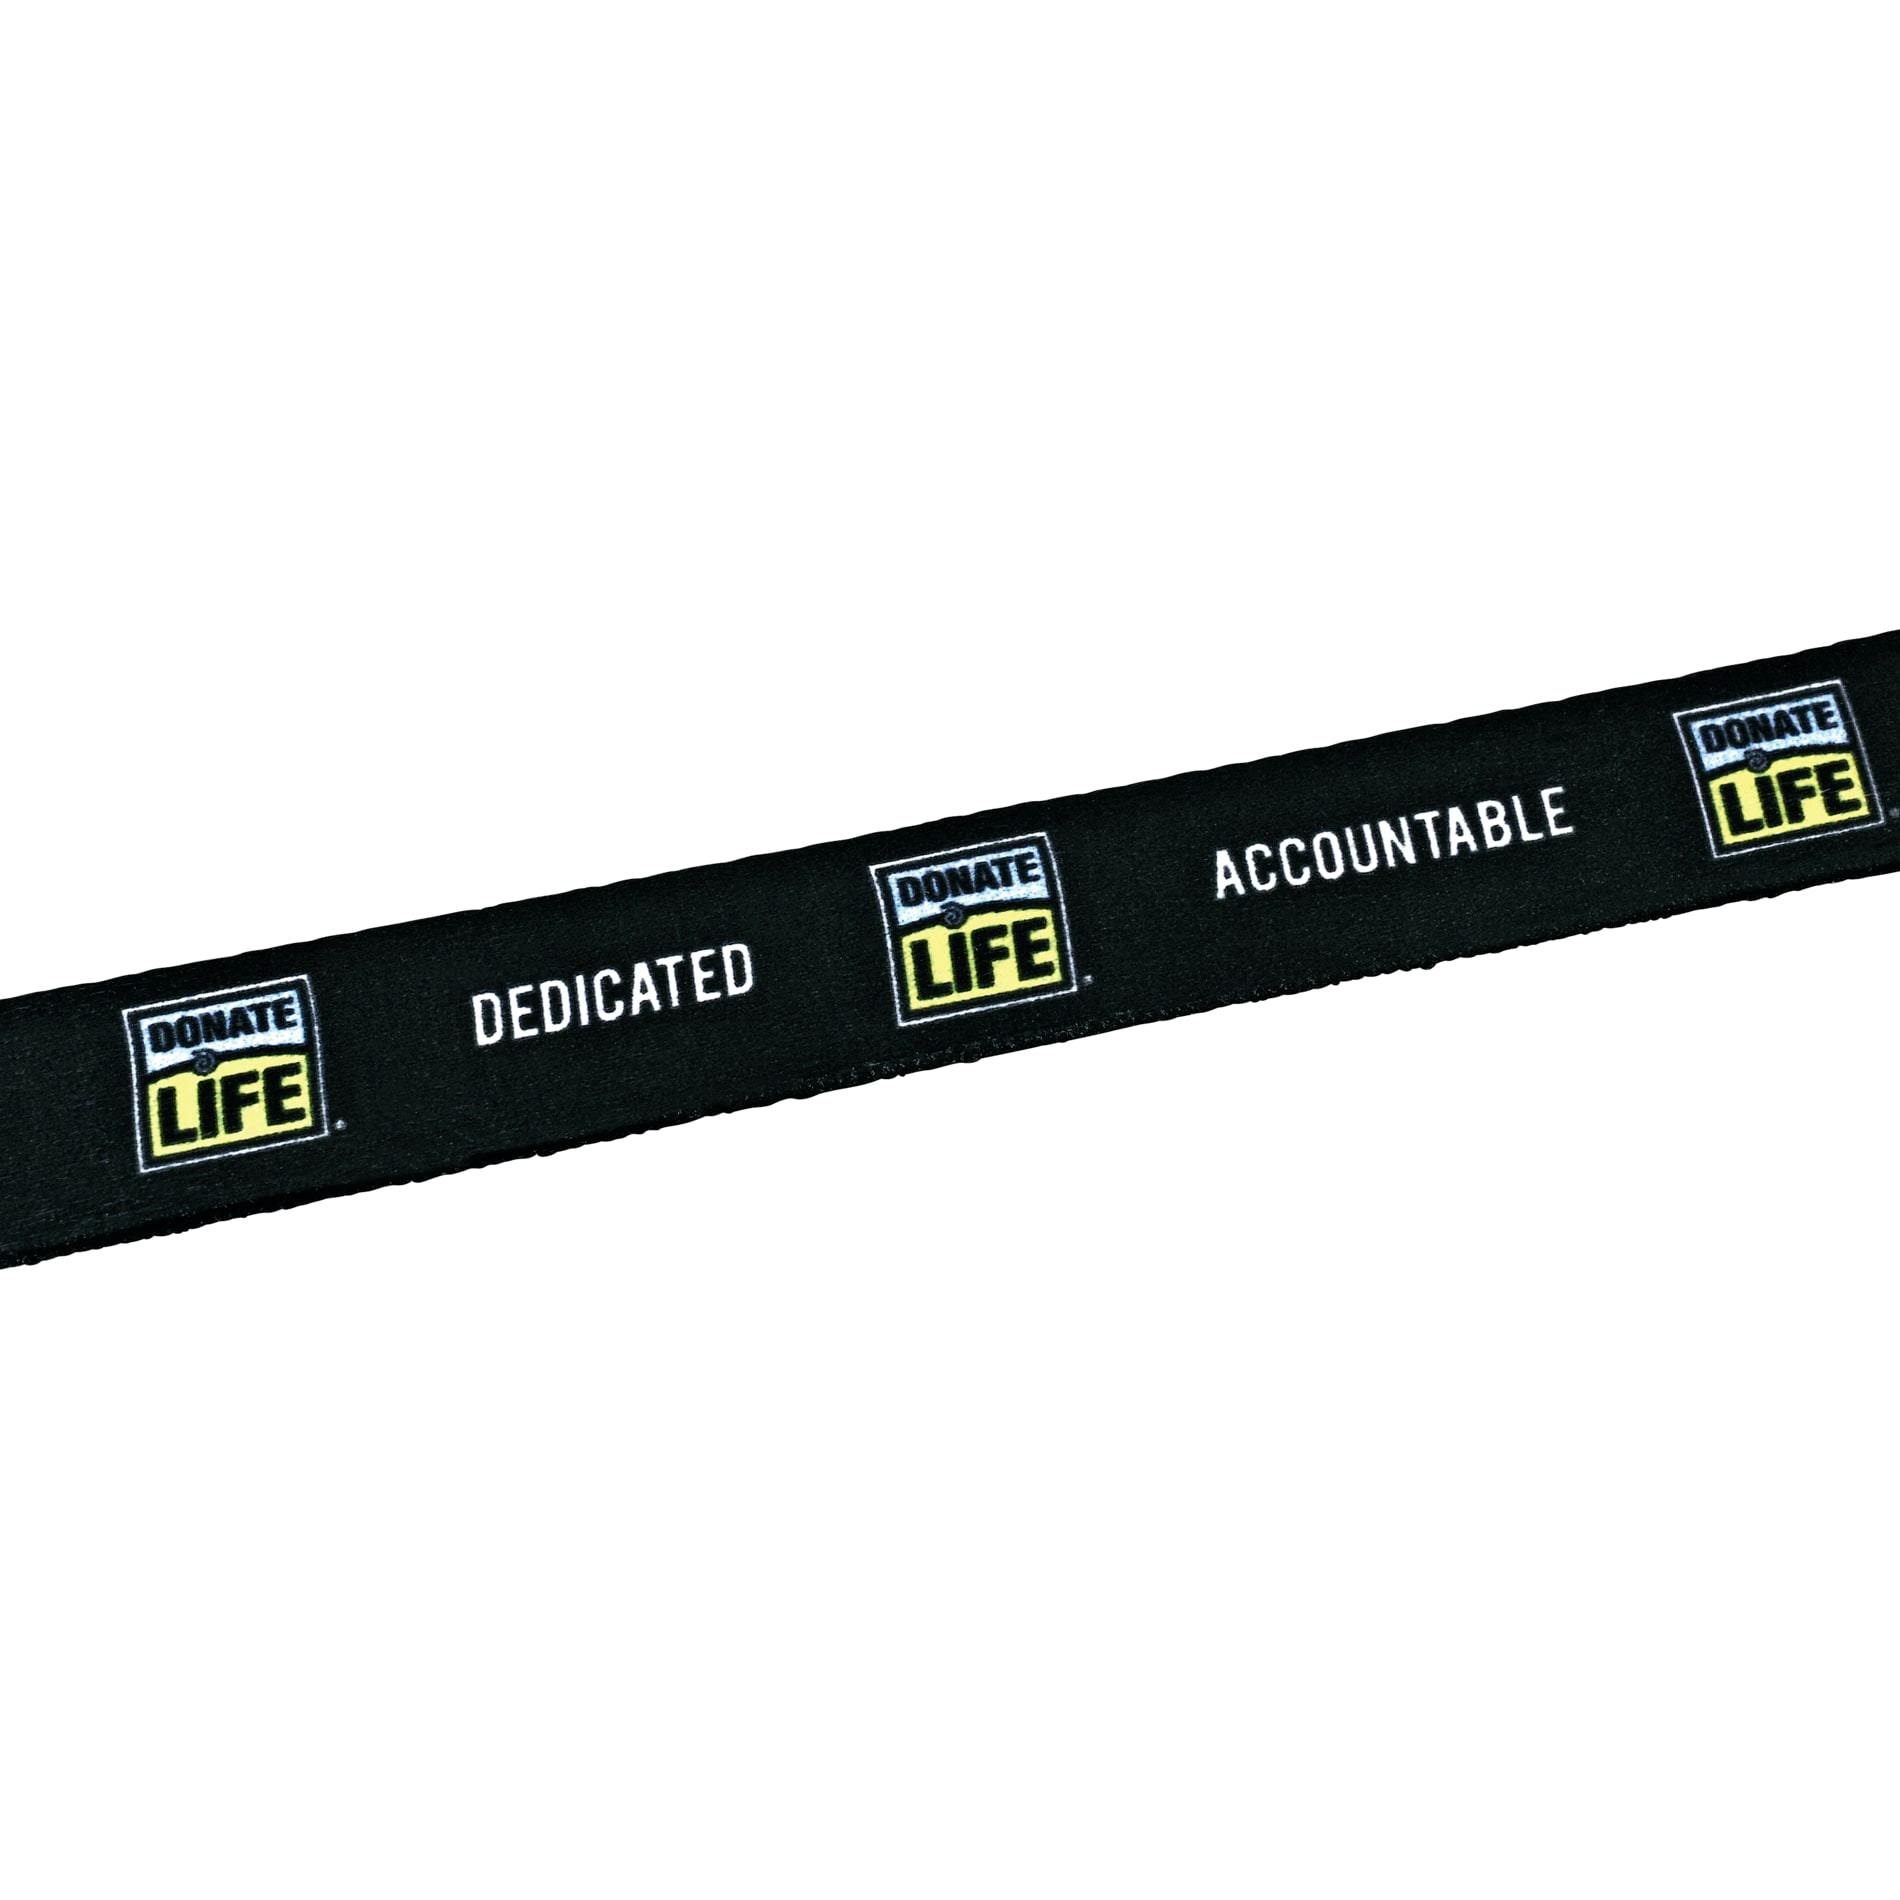 Full Color 1/2" Wristband w/ Slide Clip - additional Image 1